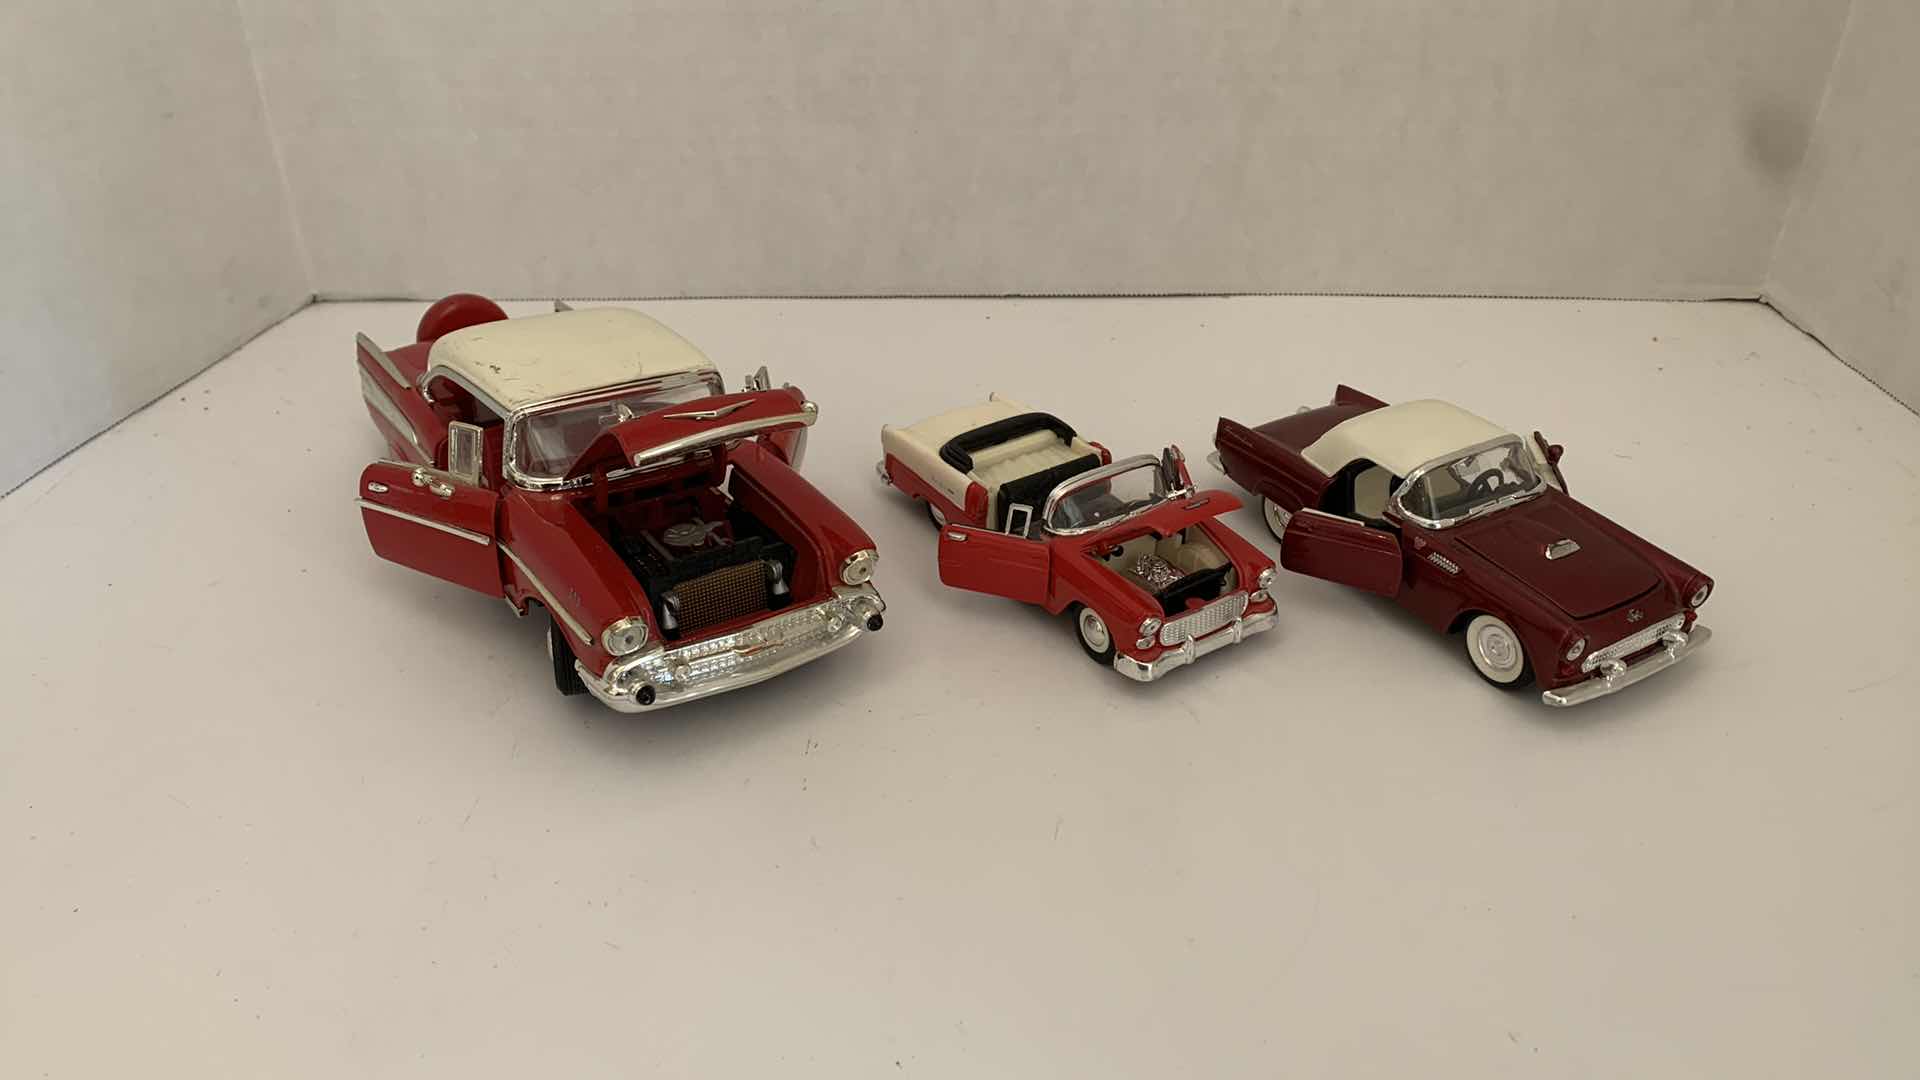 Photo 3 of SET OF 3 DIE CAST METAL 1950S CHEVROLET, LARGEST 9” X 3” H 2.5”